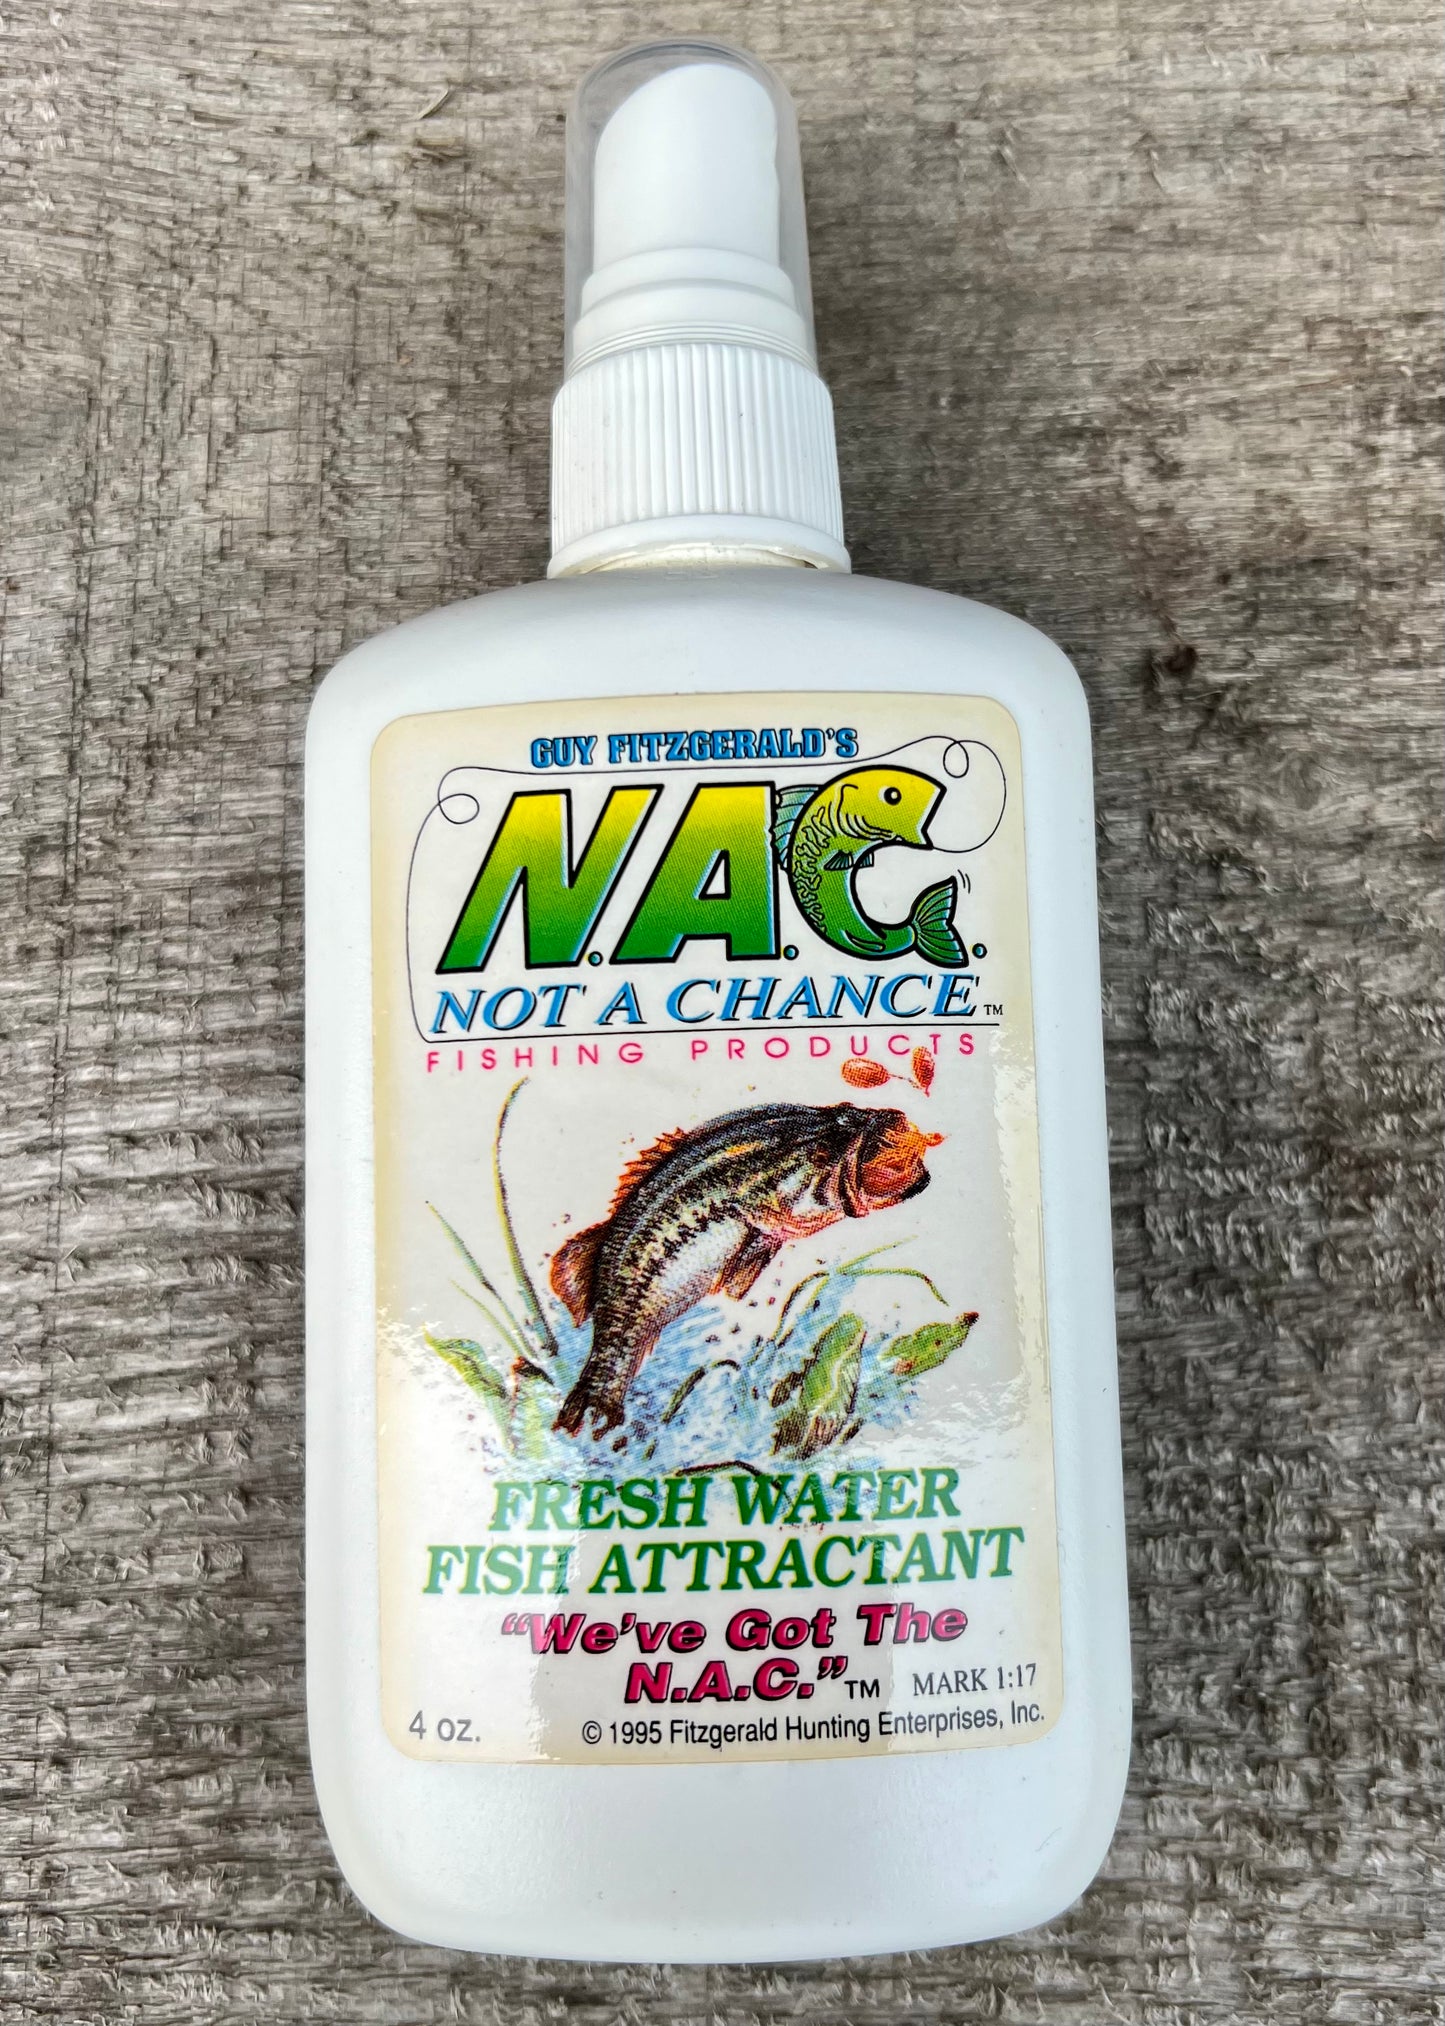 N.A.C. Not A Chance For The Fish That Is Fish Attractant